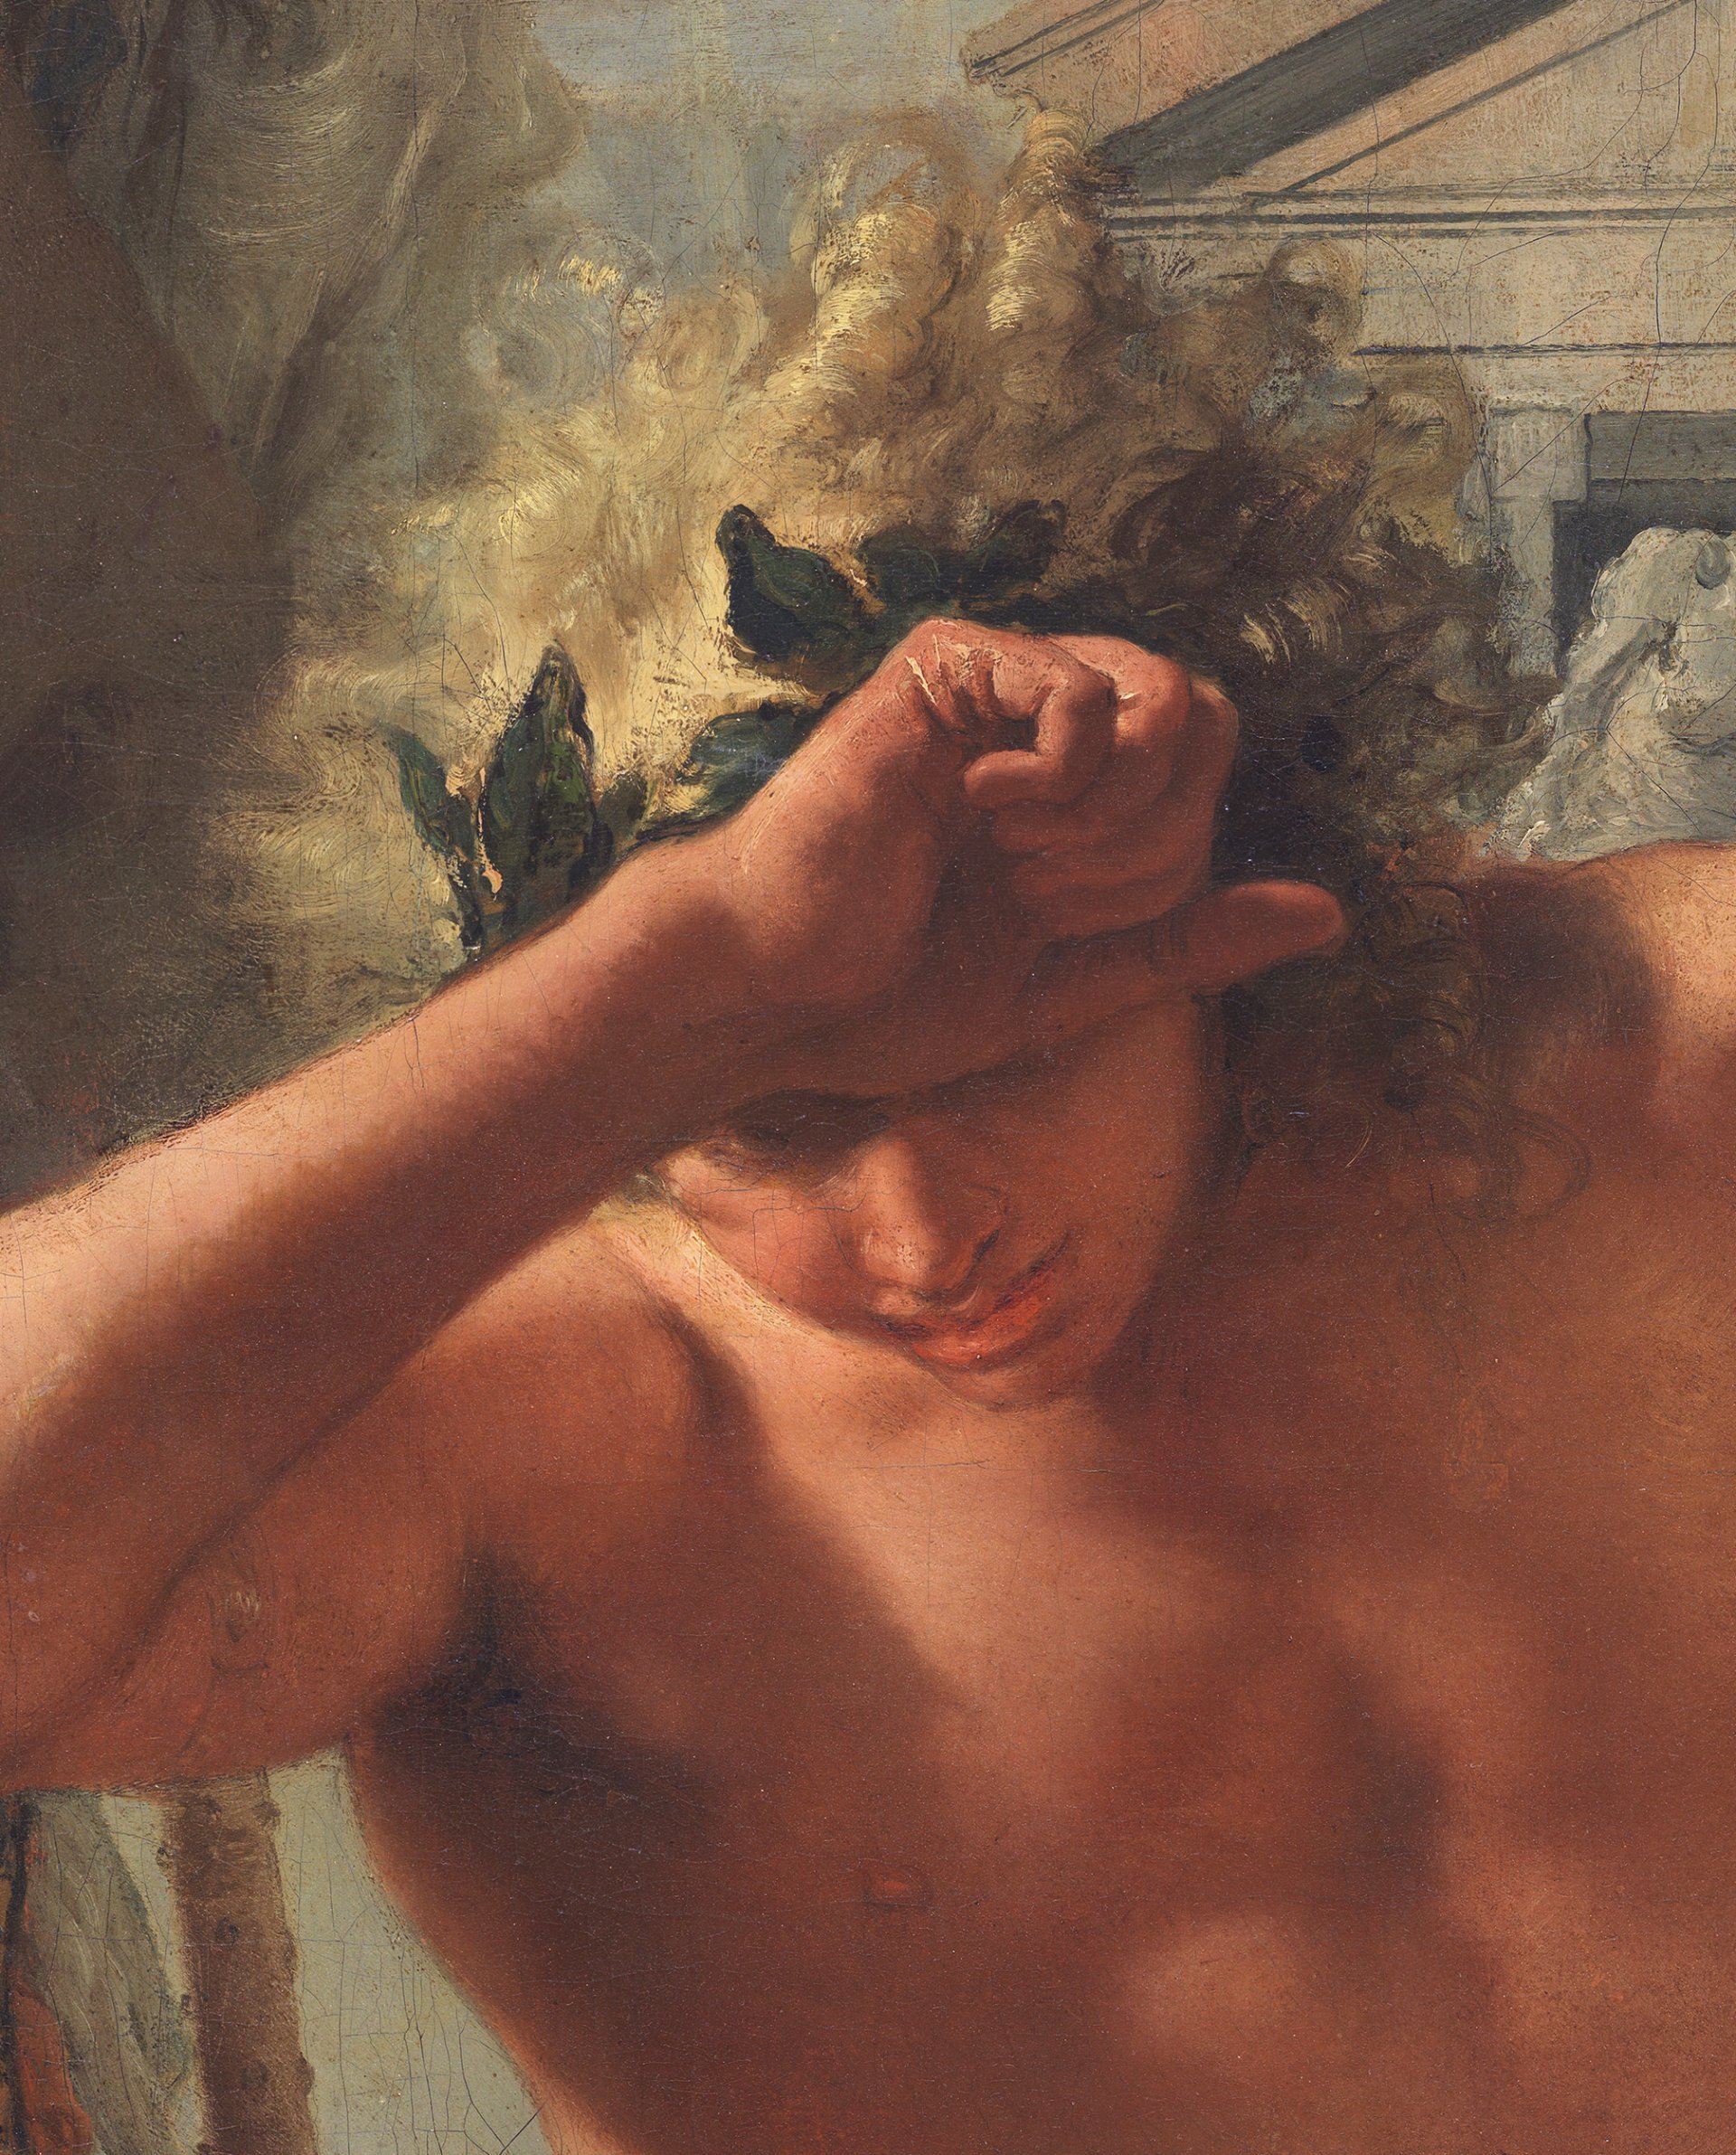 Detail of Apollo in a visible image of Giambattista Tiepolo's painting.